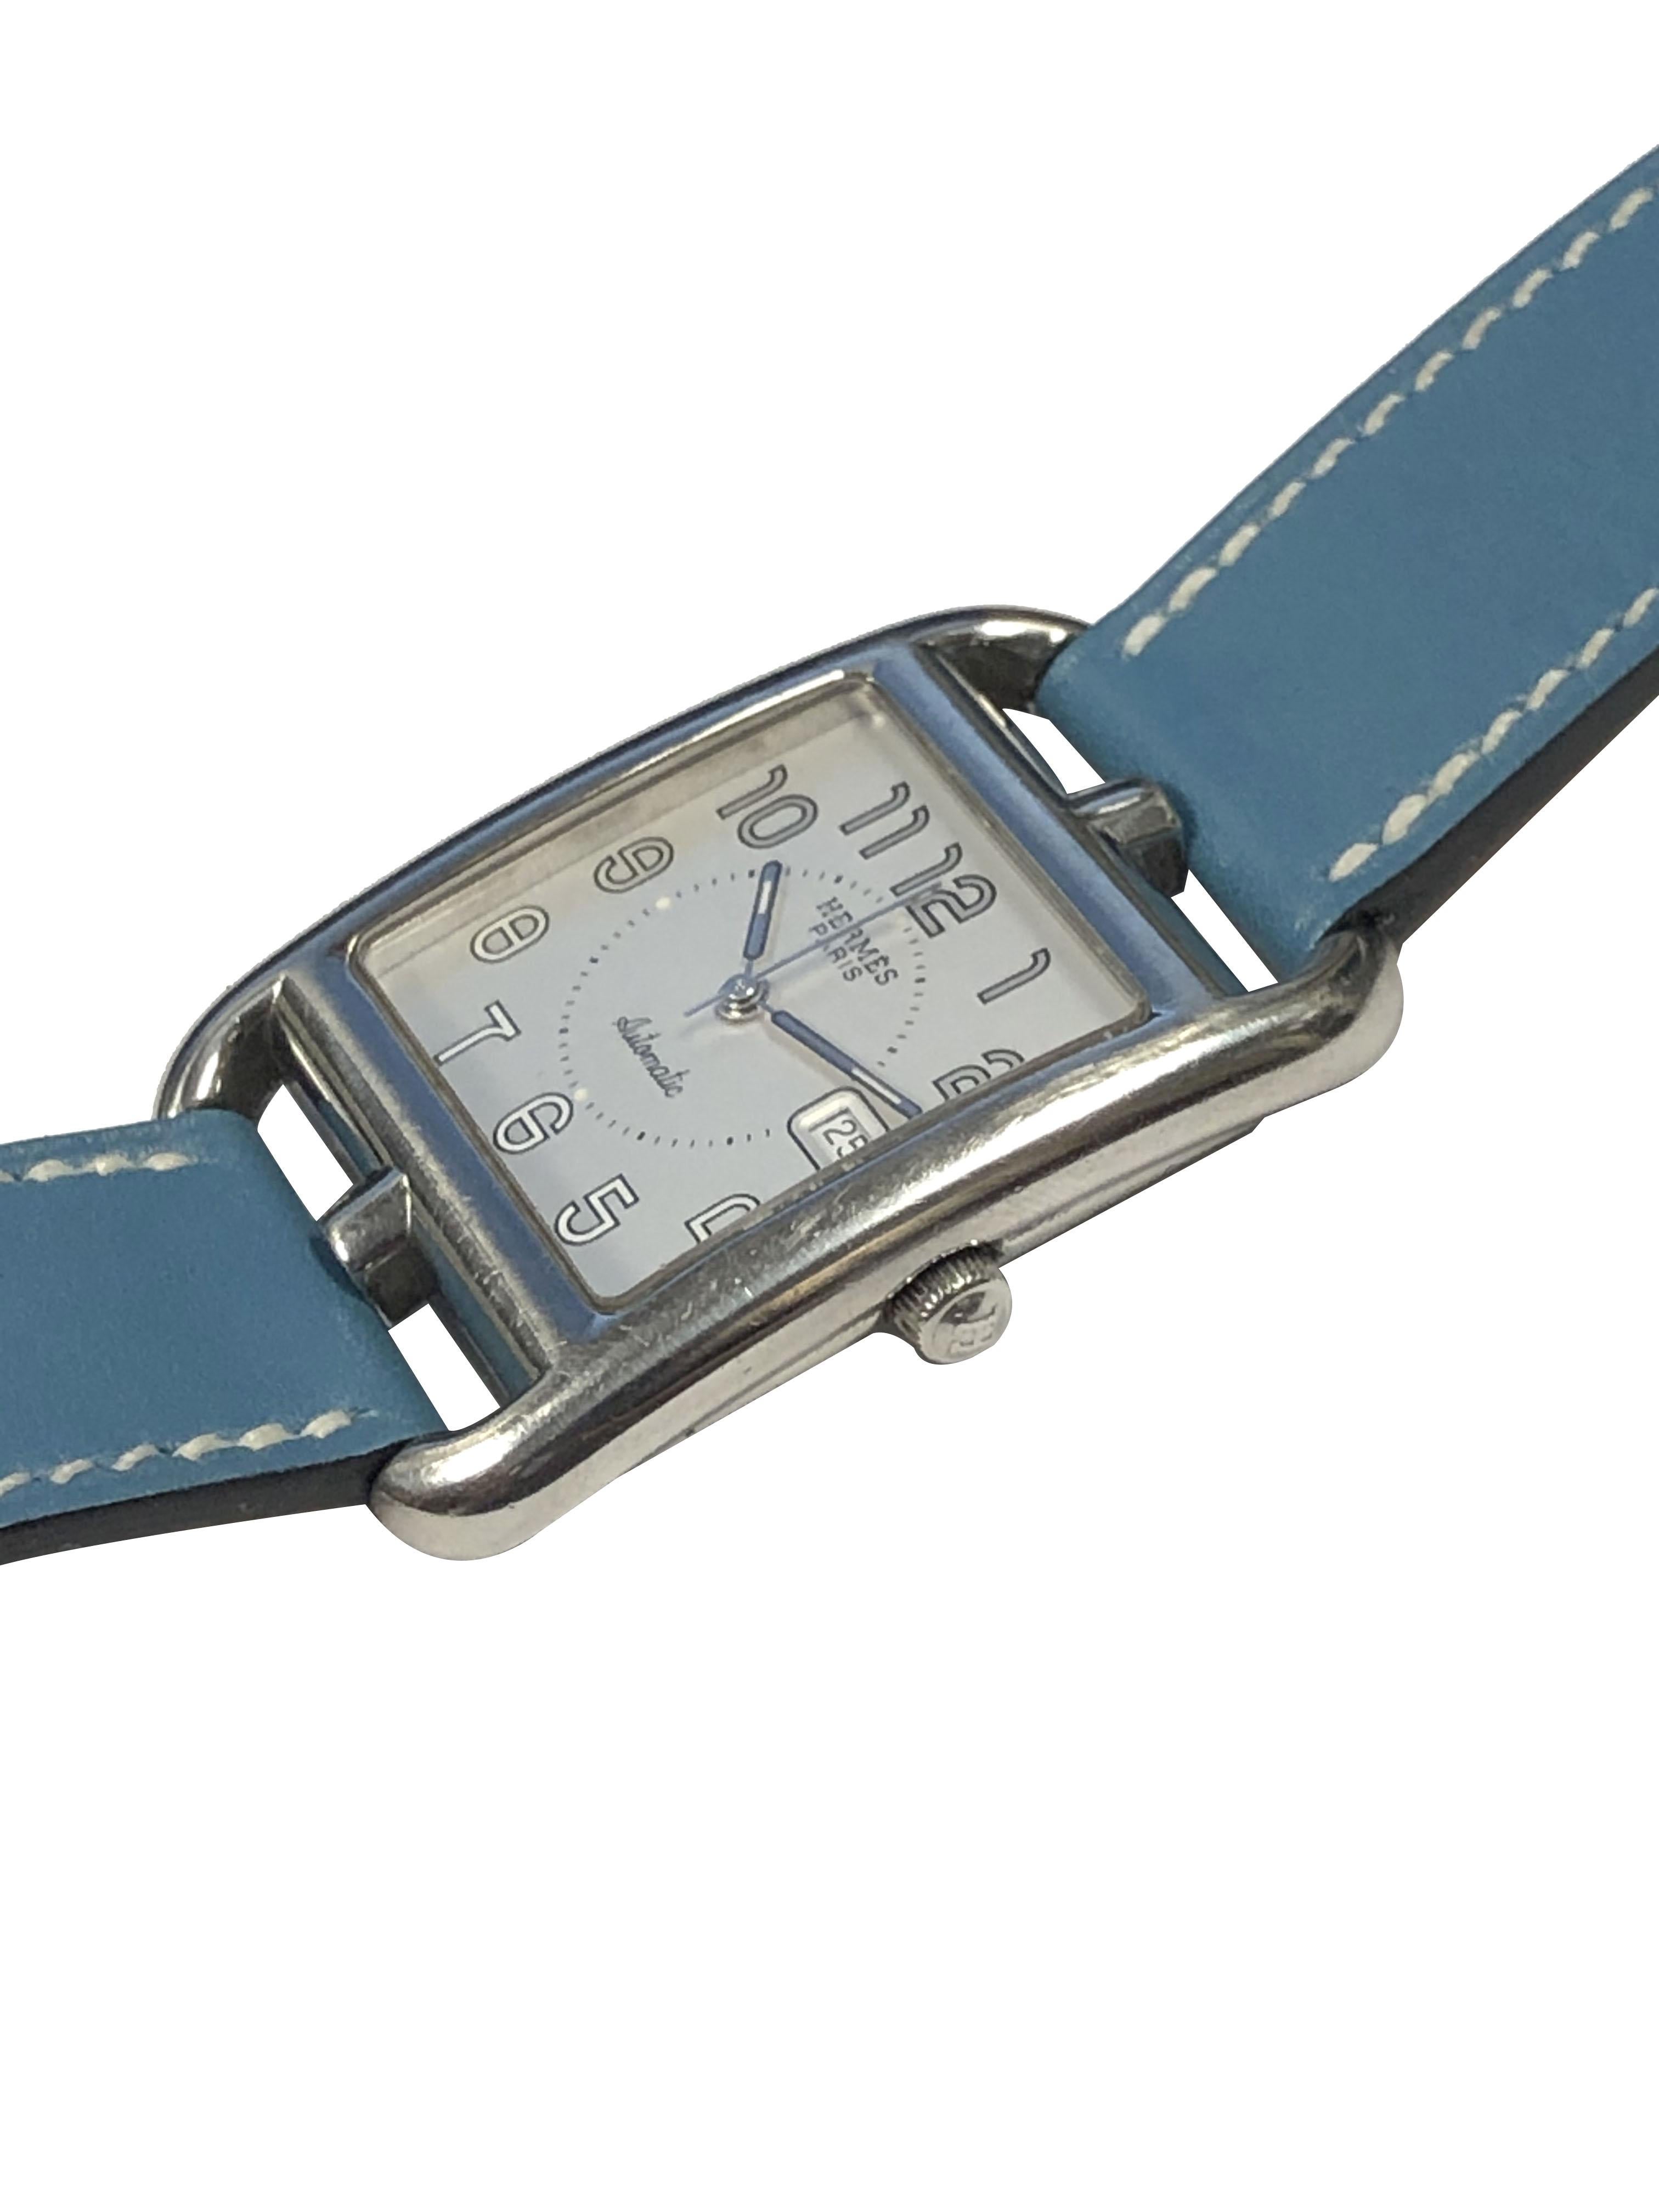 Circa 2019 Hermes Cape Cod Wrist Watch, 29 X 29 M.M. 2 Piece Water resistant case, Automatic, self winding movement, Silver Satin dial with Calendar window at the 3 position. Original Blue with White stitching wrap around 